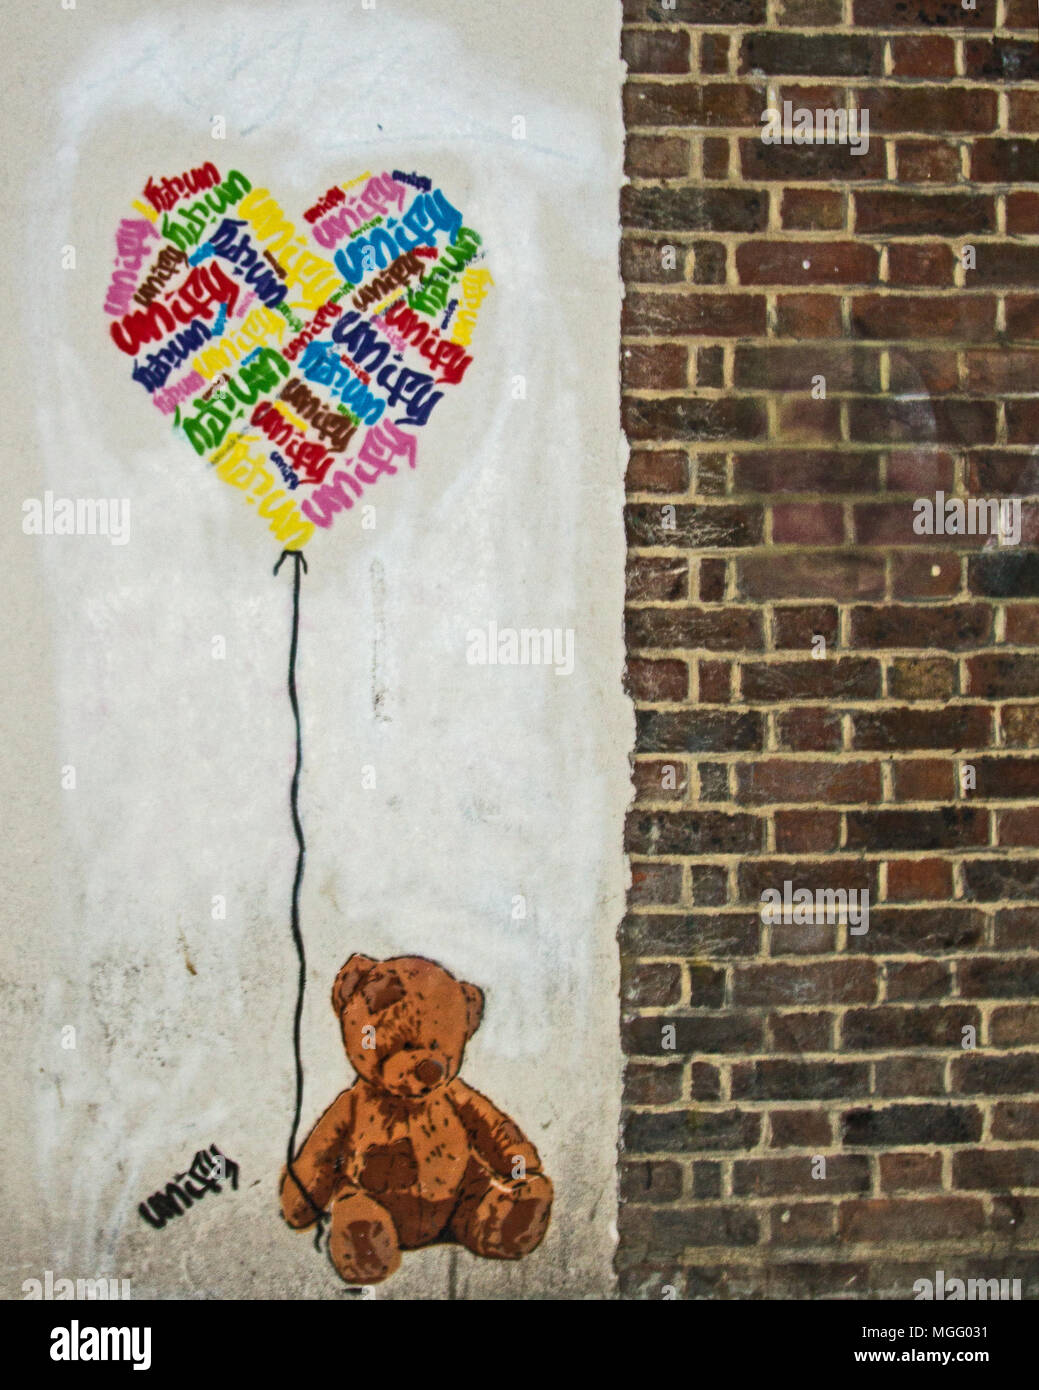 London Street art, giving colour and art to the streets of London's hidden corners. Stock Photo